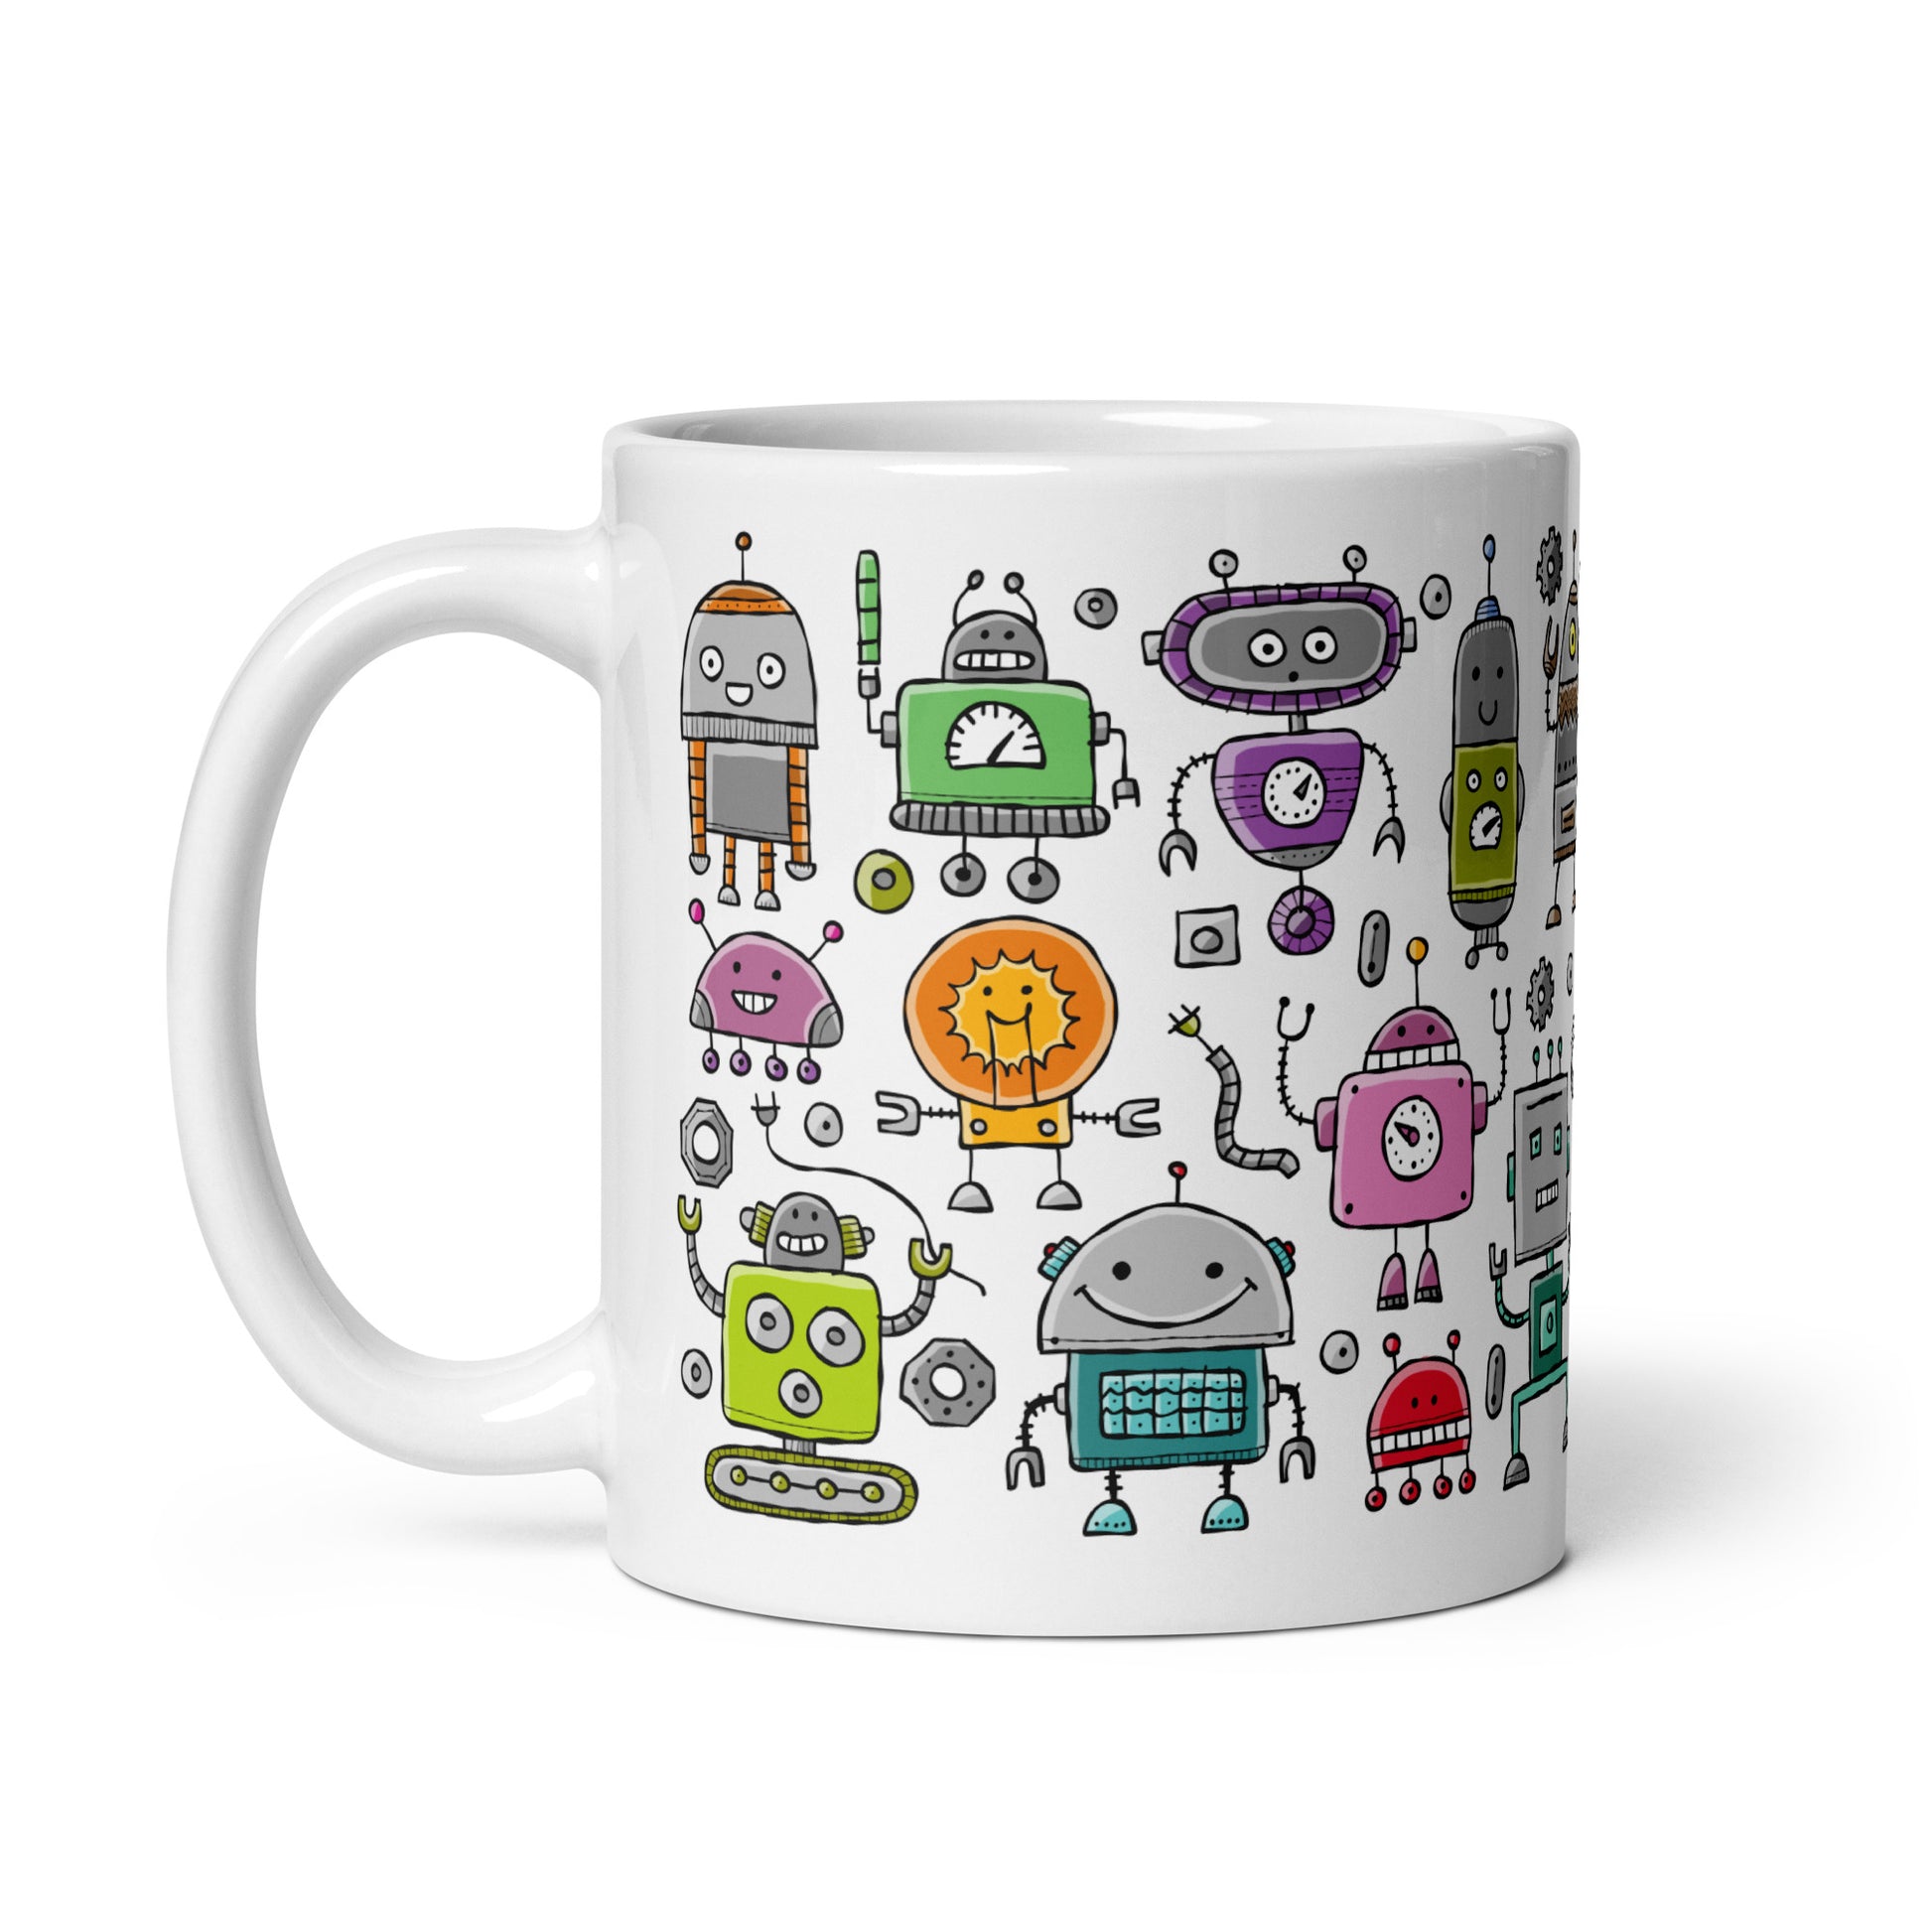 A white ceramic 11oz mug with a collection of colorful and comical robots, perfect for adding joy and laughter to your morning routine